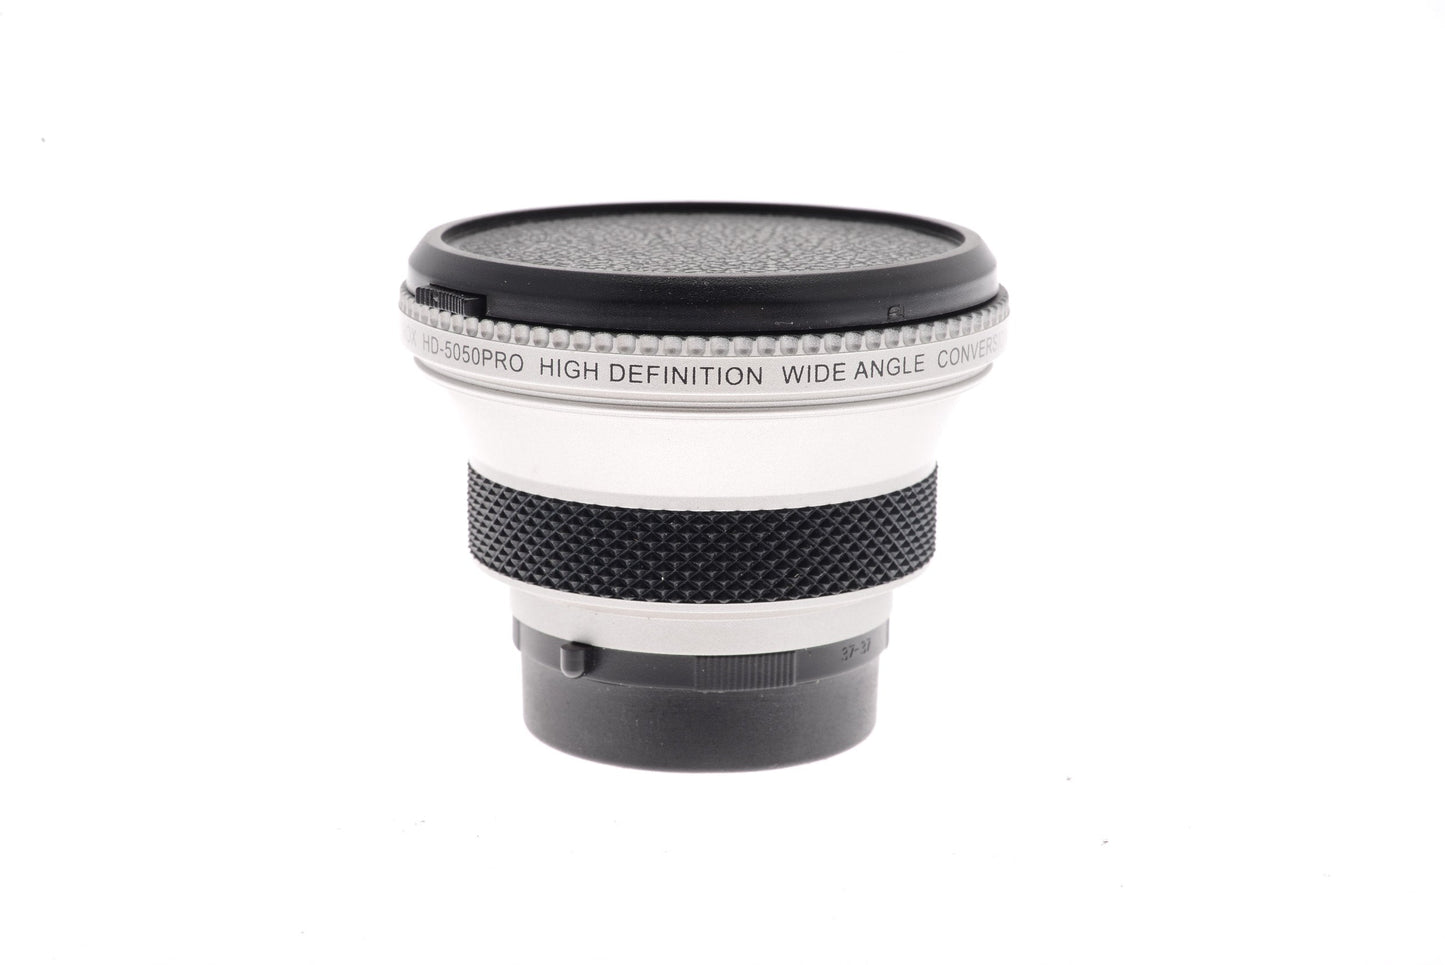 Raynox 37mm HD-5050PRO 0.5x Wide-Angle Conversion Lens - Lens